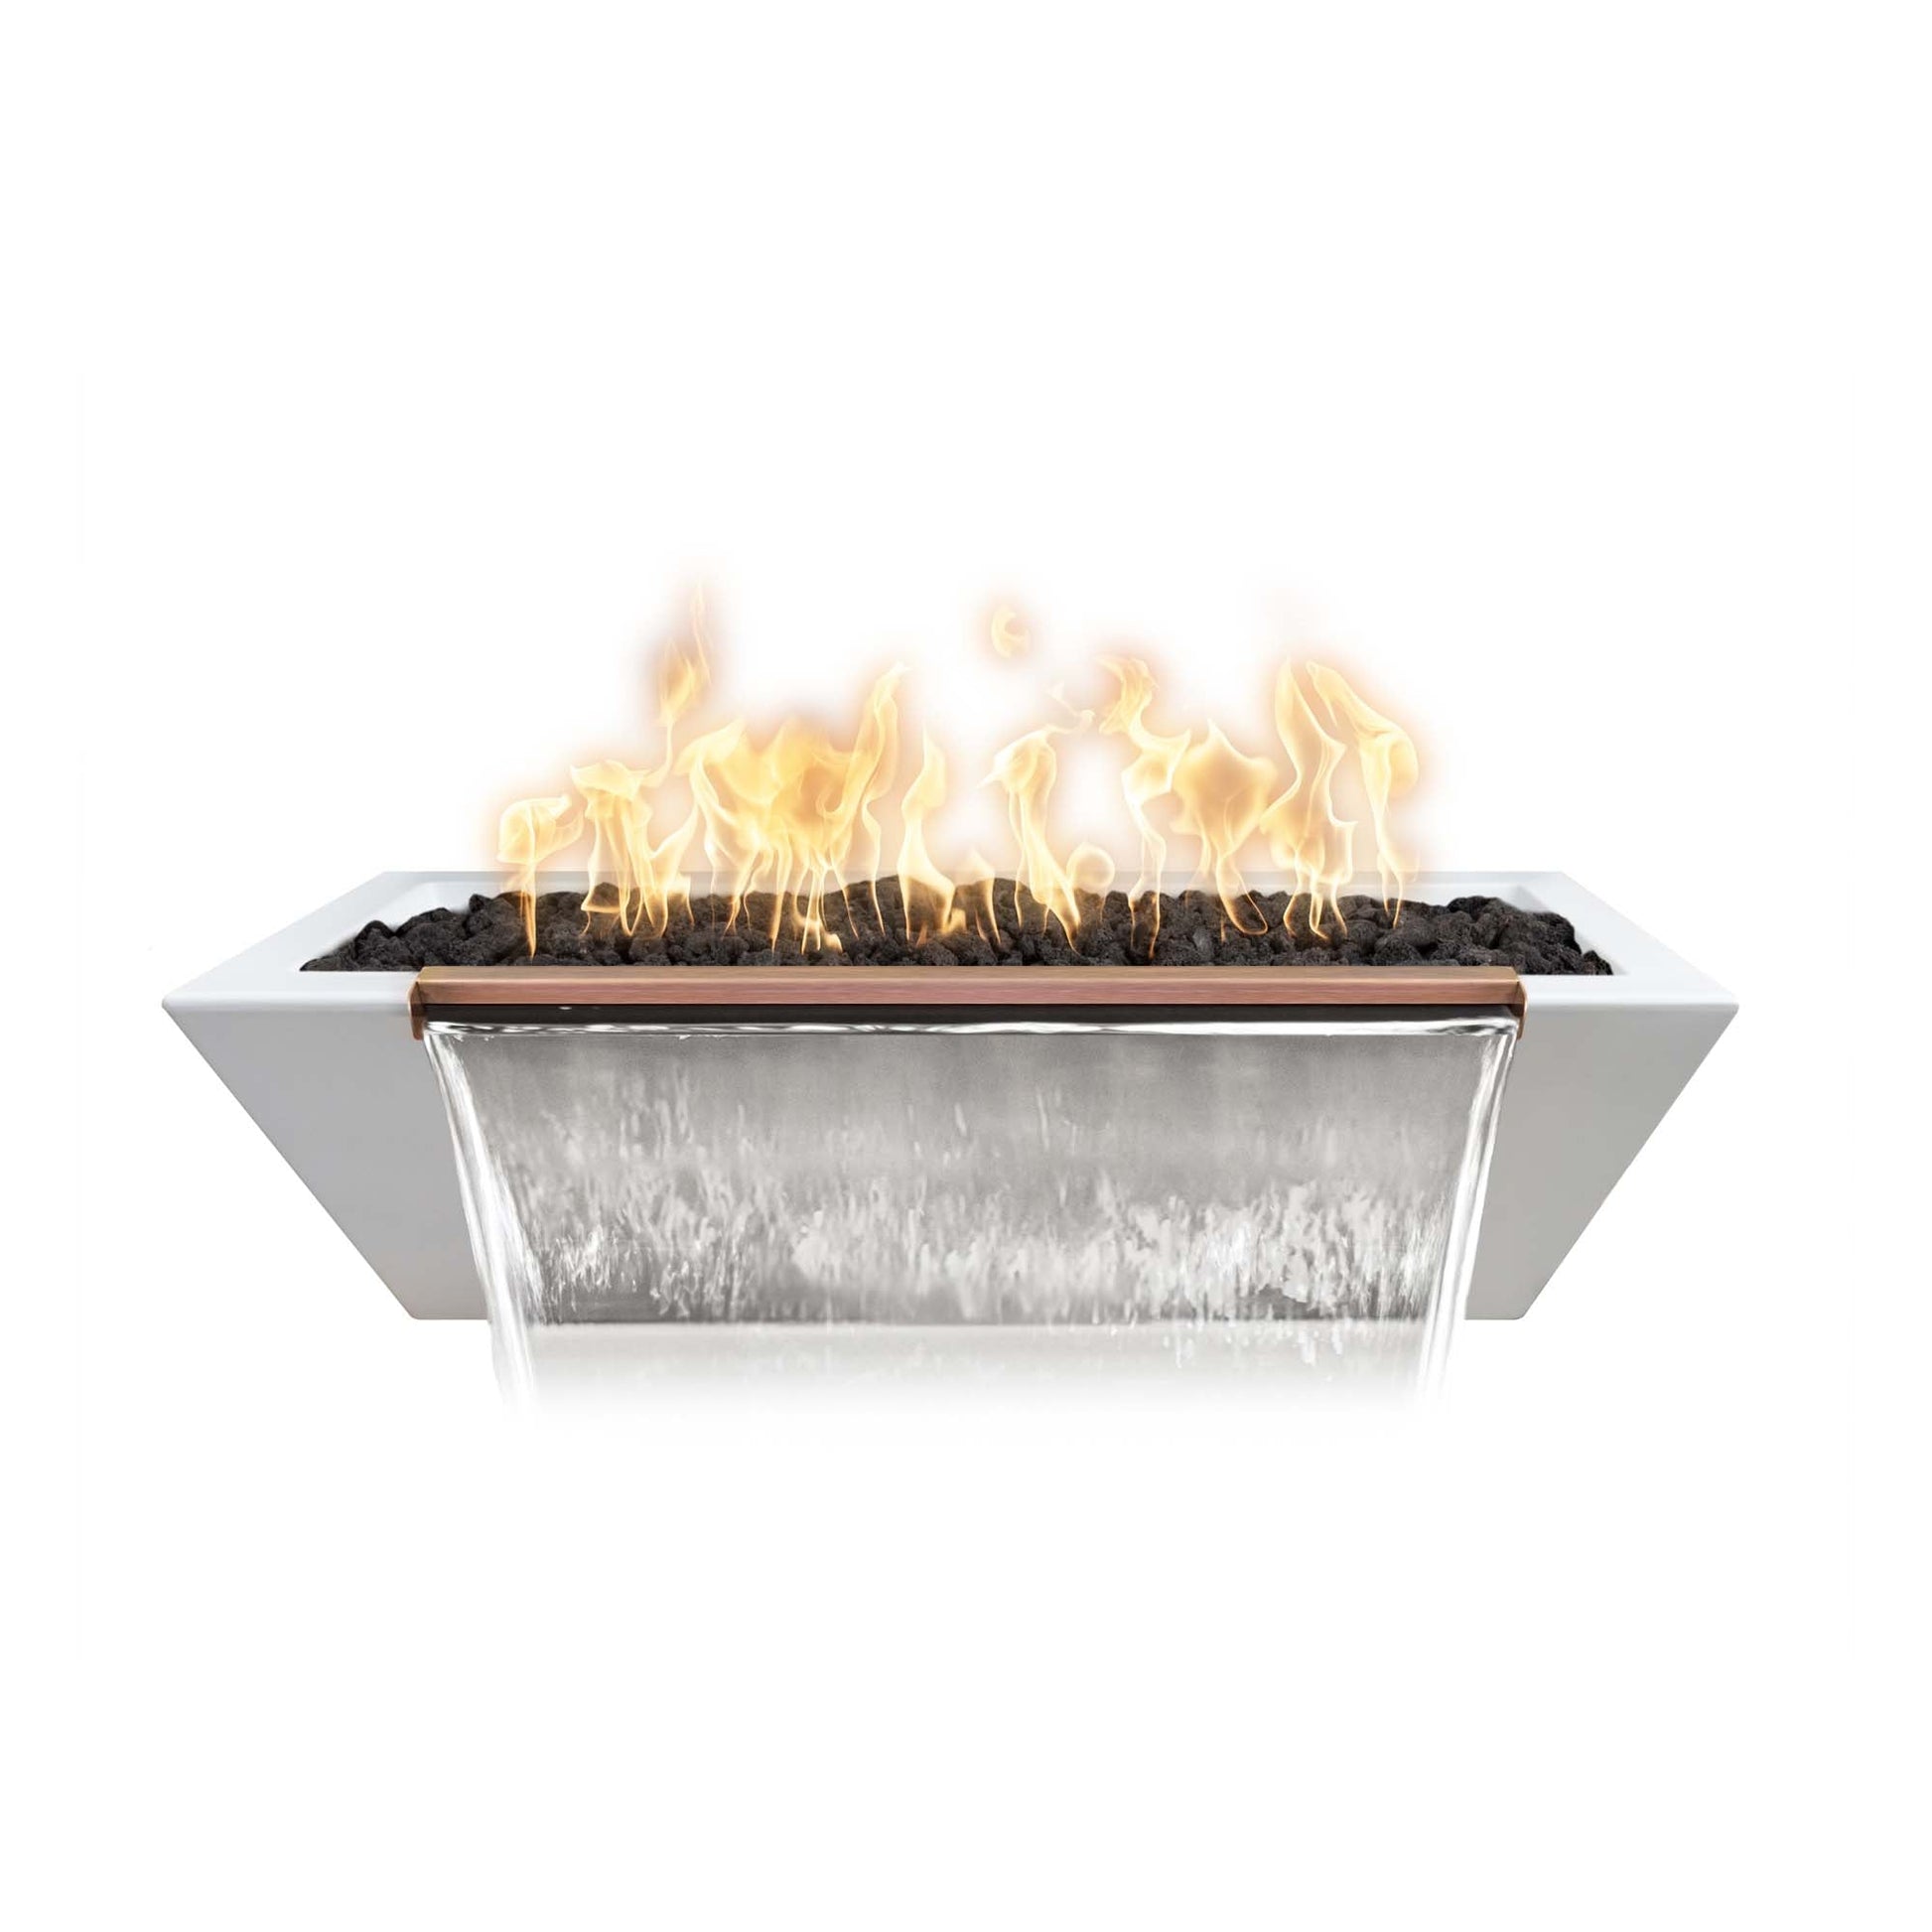 The Outdoor Plus Linear Maya 60" Metallic Slate GFRC Concrete Liquid Propane Fire & Water Bowl with Match Lit Ignition